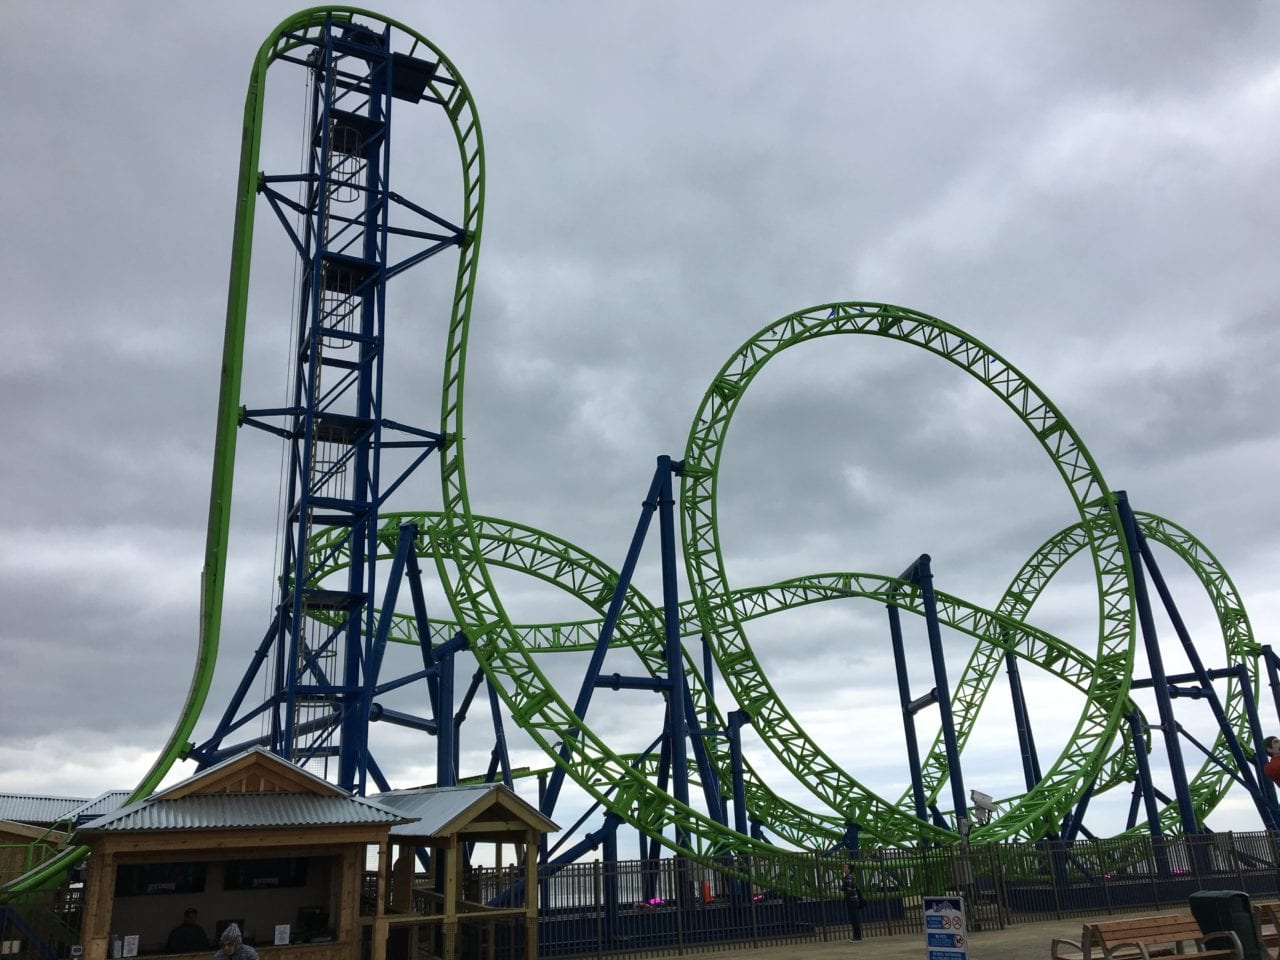 New ‘Hydrus’ Roller Coaster Opens At Seaside Heights Casino Pier (CBS